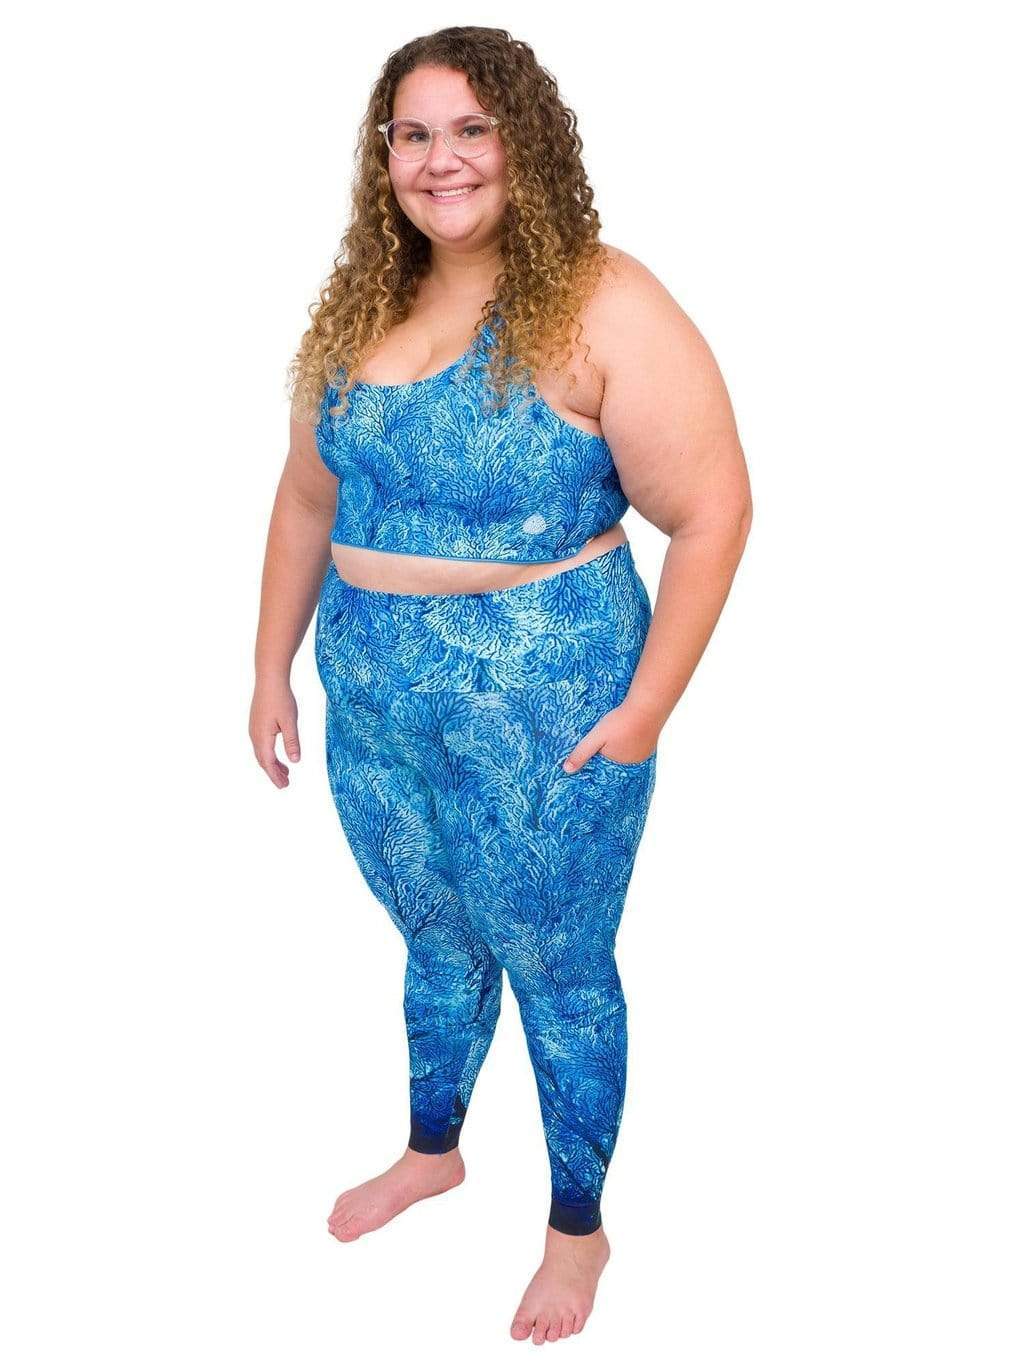 Model: Angela is working towards her Master of Professional Science in Marine Conservation. She is 5&#39;6&quot;, 235 lbs, 42E and is wearing a 2XL top and legging.